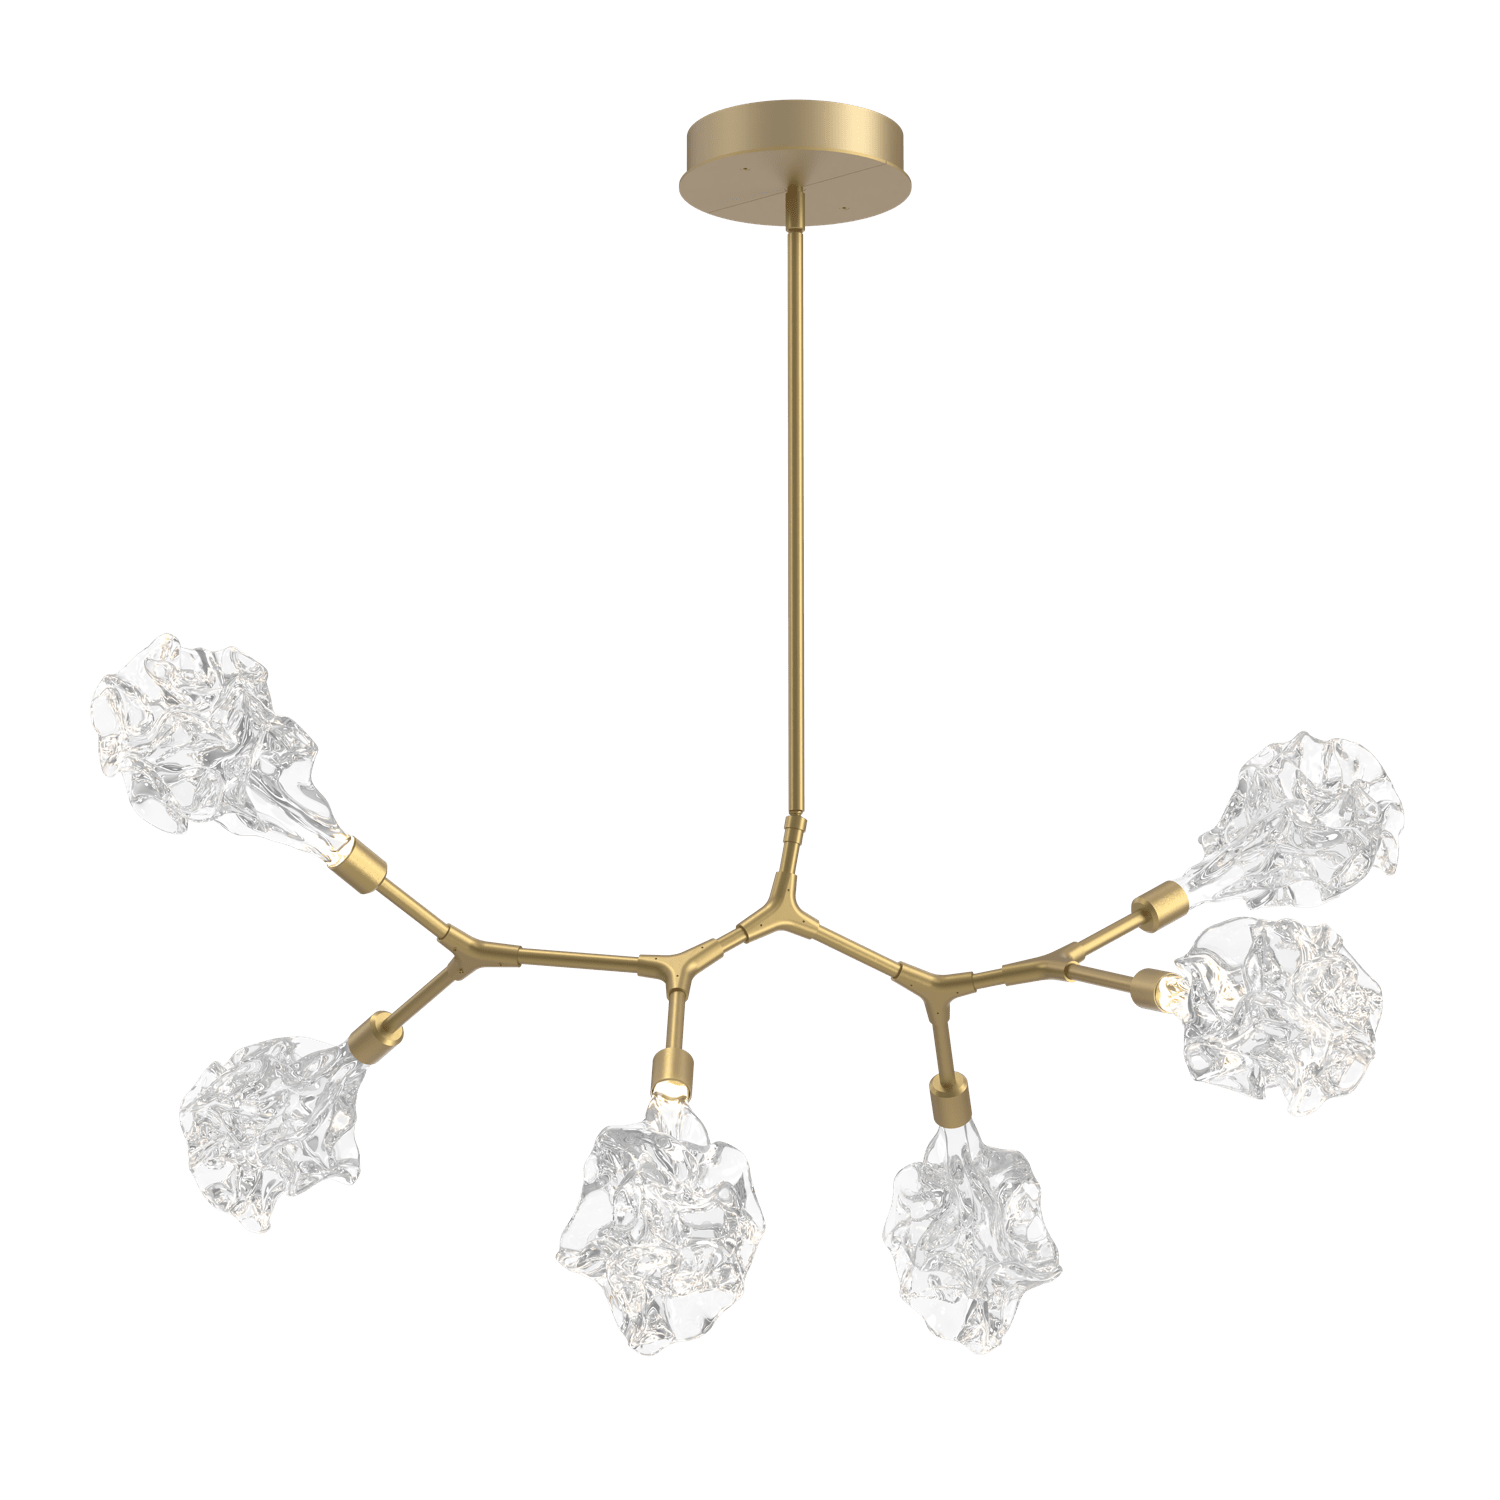 PLB0059-BA-GB-Hammerton-Studio-Blossom-6-light-organic-branch-chandelier-with-gilded-brass-finish-and-clear-handblown-crystal-glass-shades-and-LED-lamping